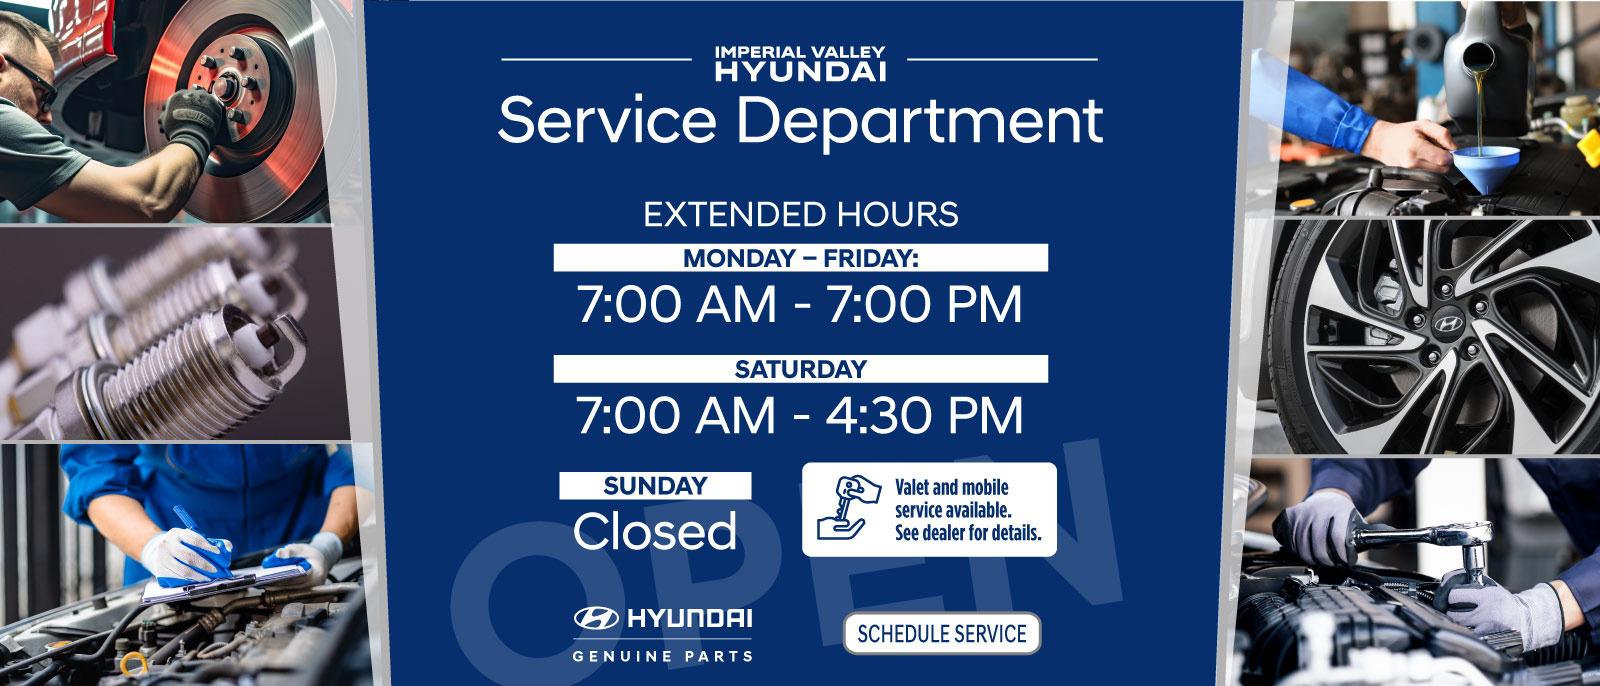 Imperial Valley Hyundai Service Hours